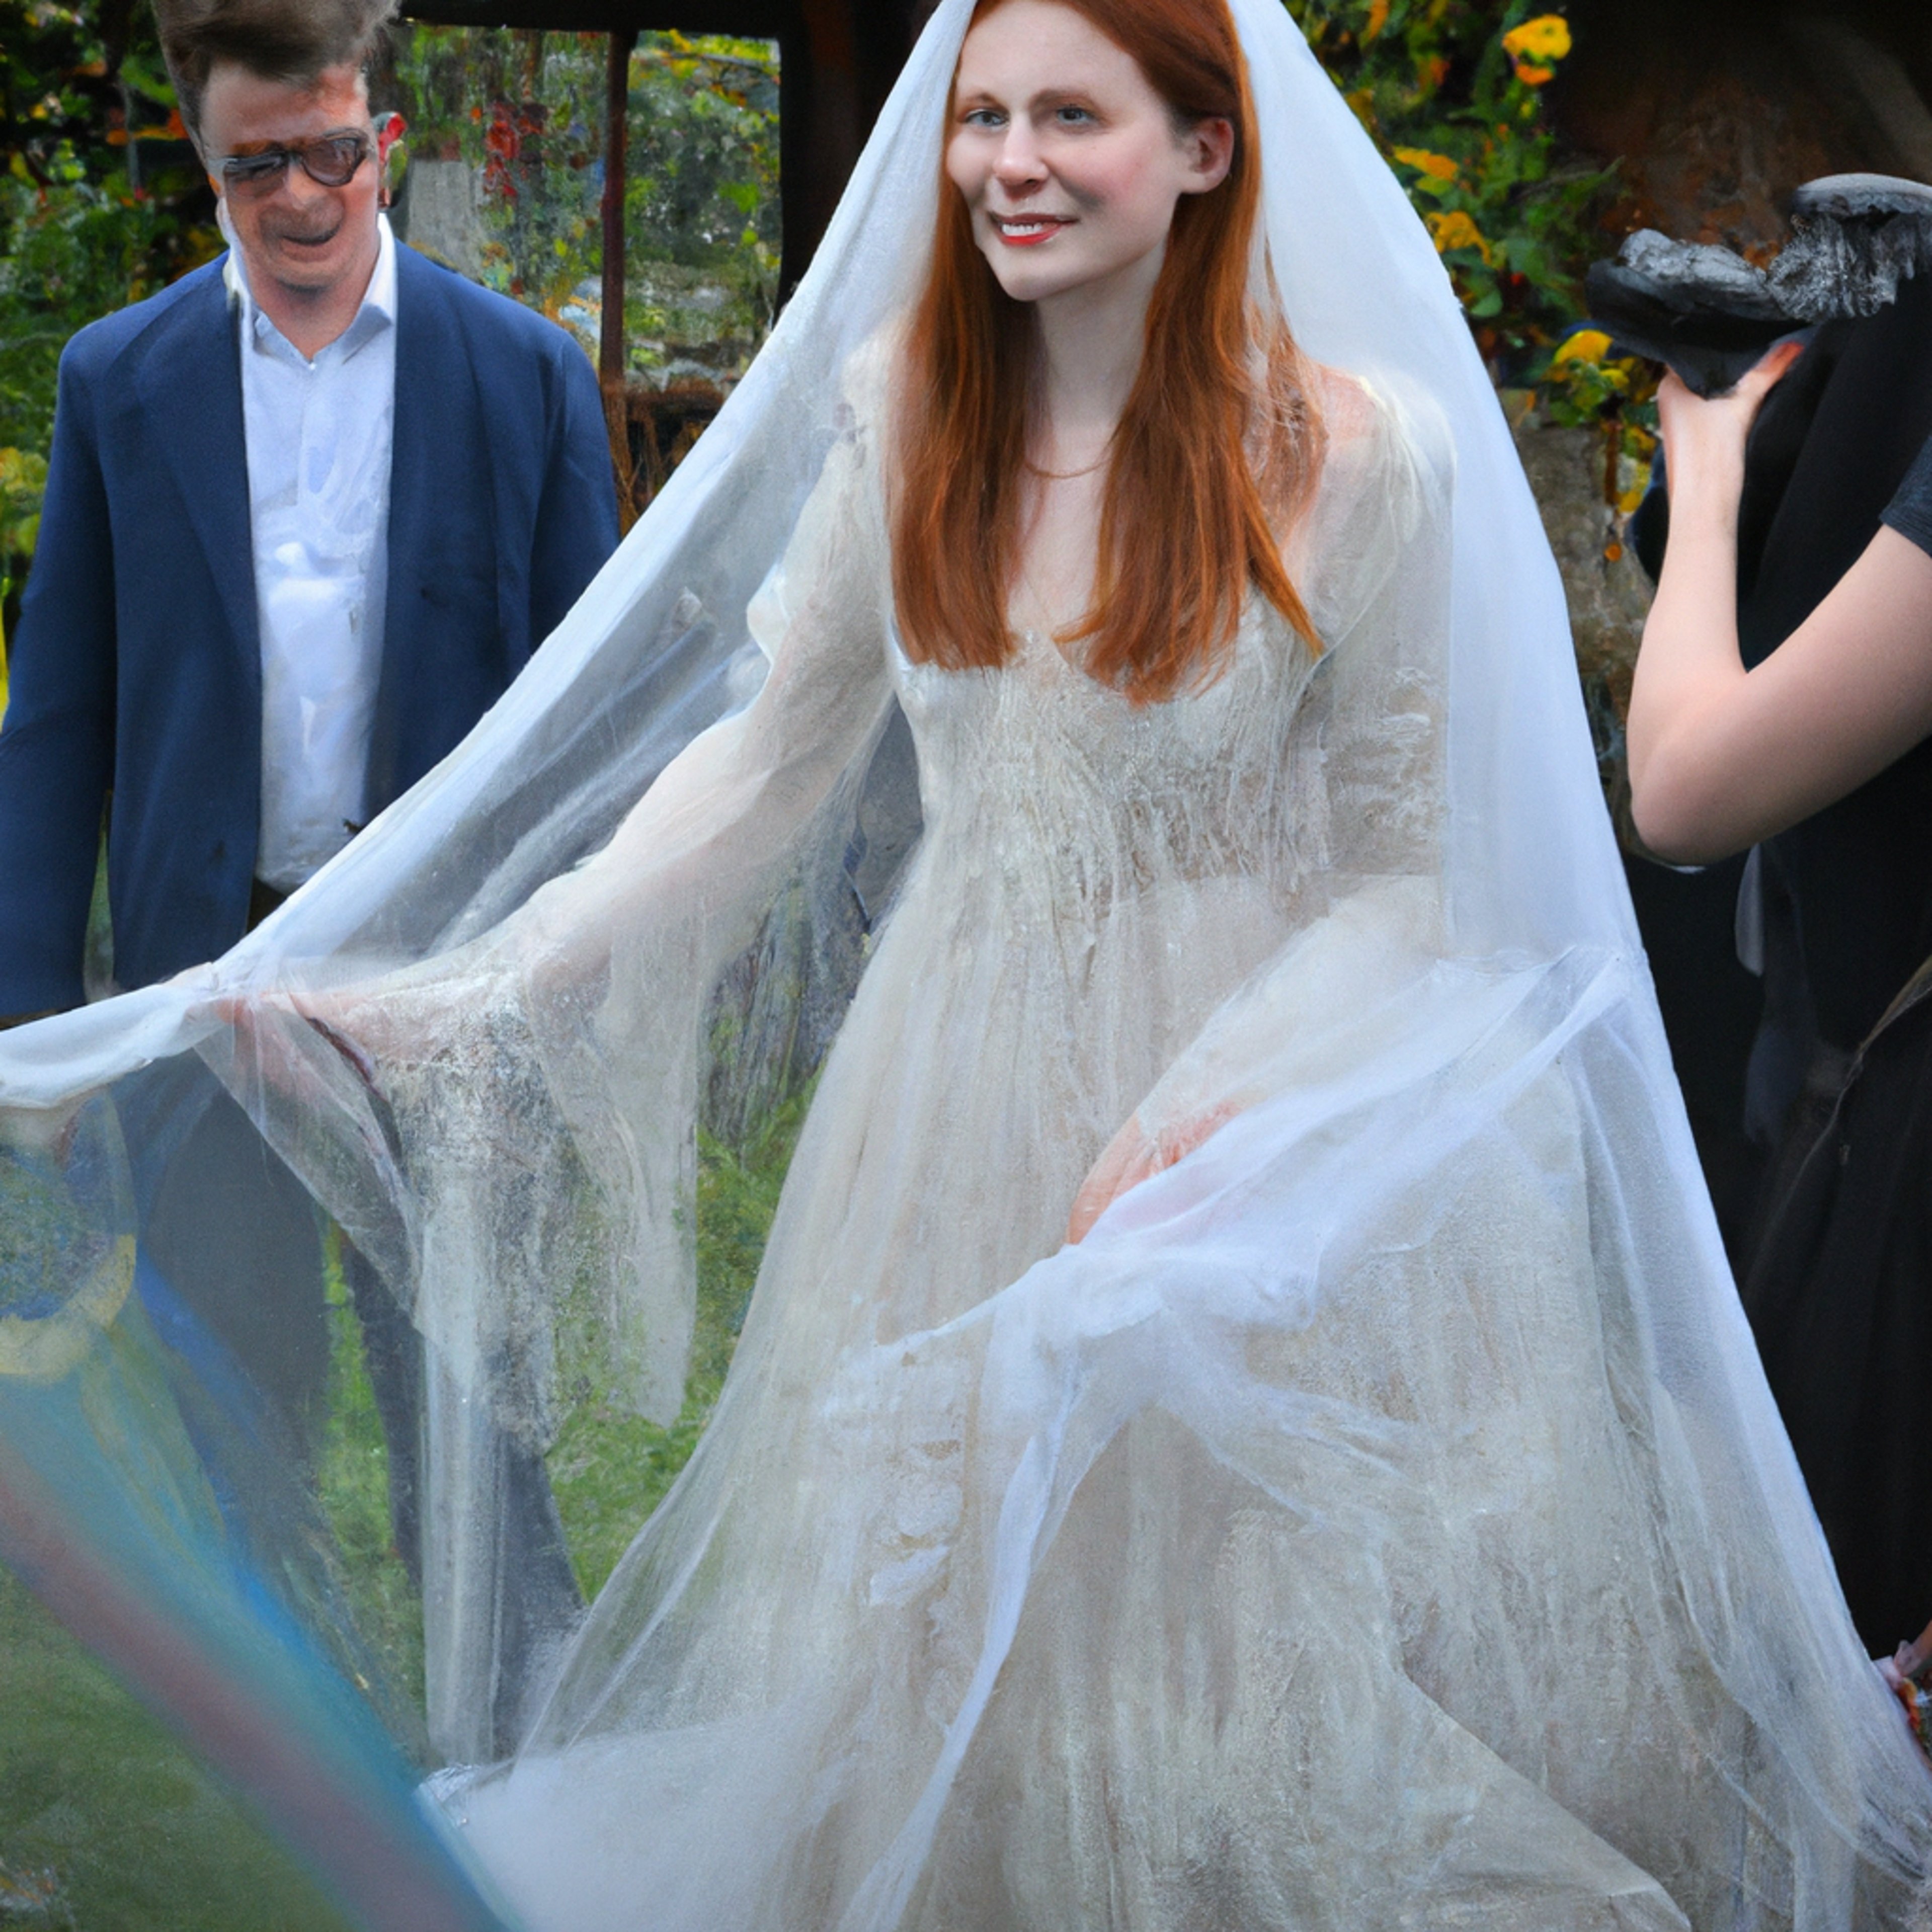 Harry Potter Star Bonnie Wright Ties the Knot in a 100-Year-Old See-Through Wedding Dress